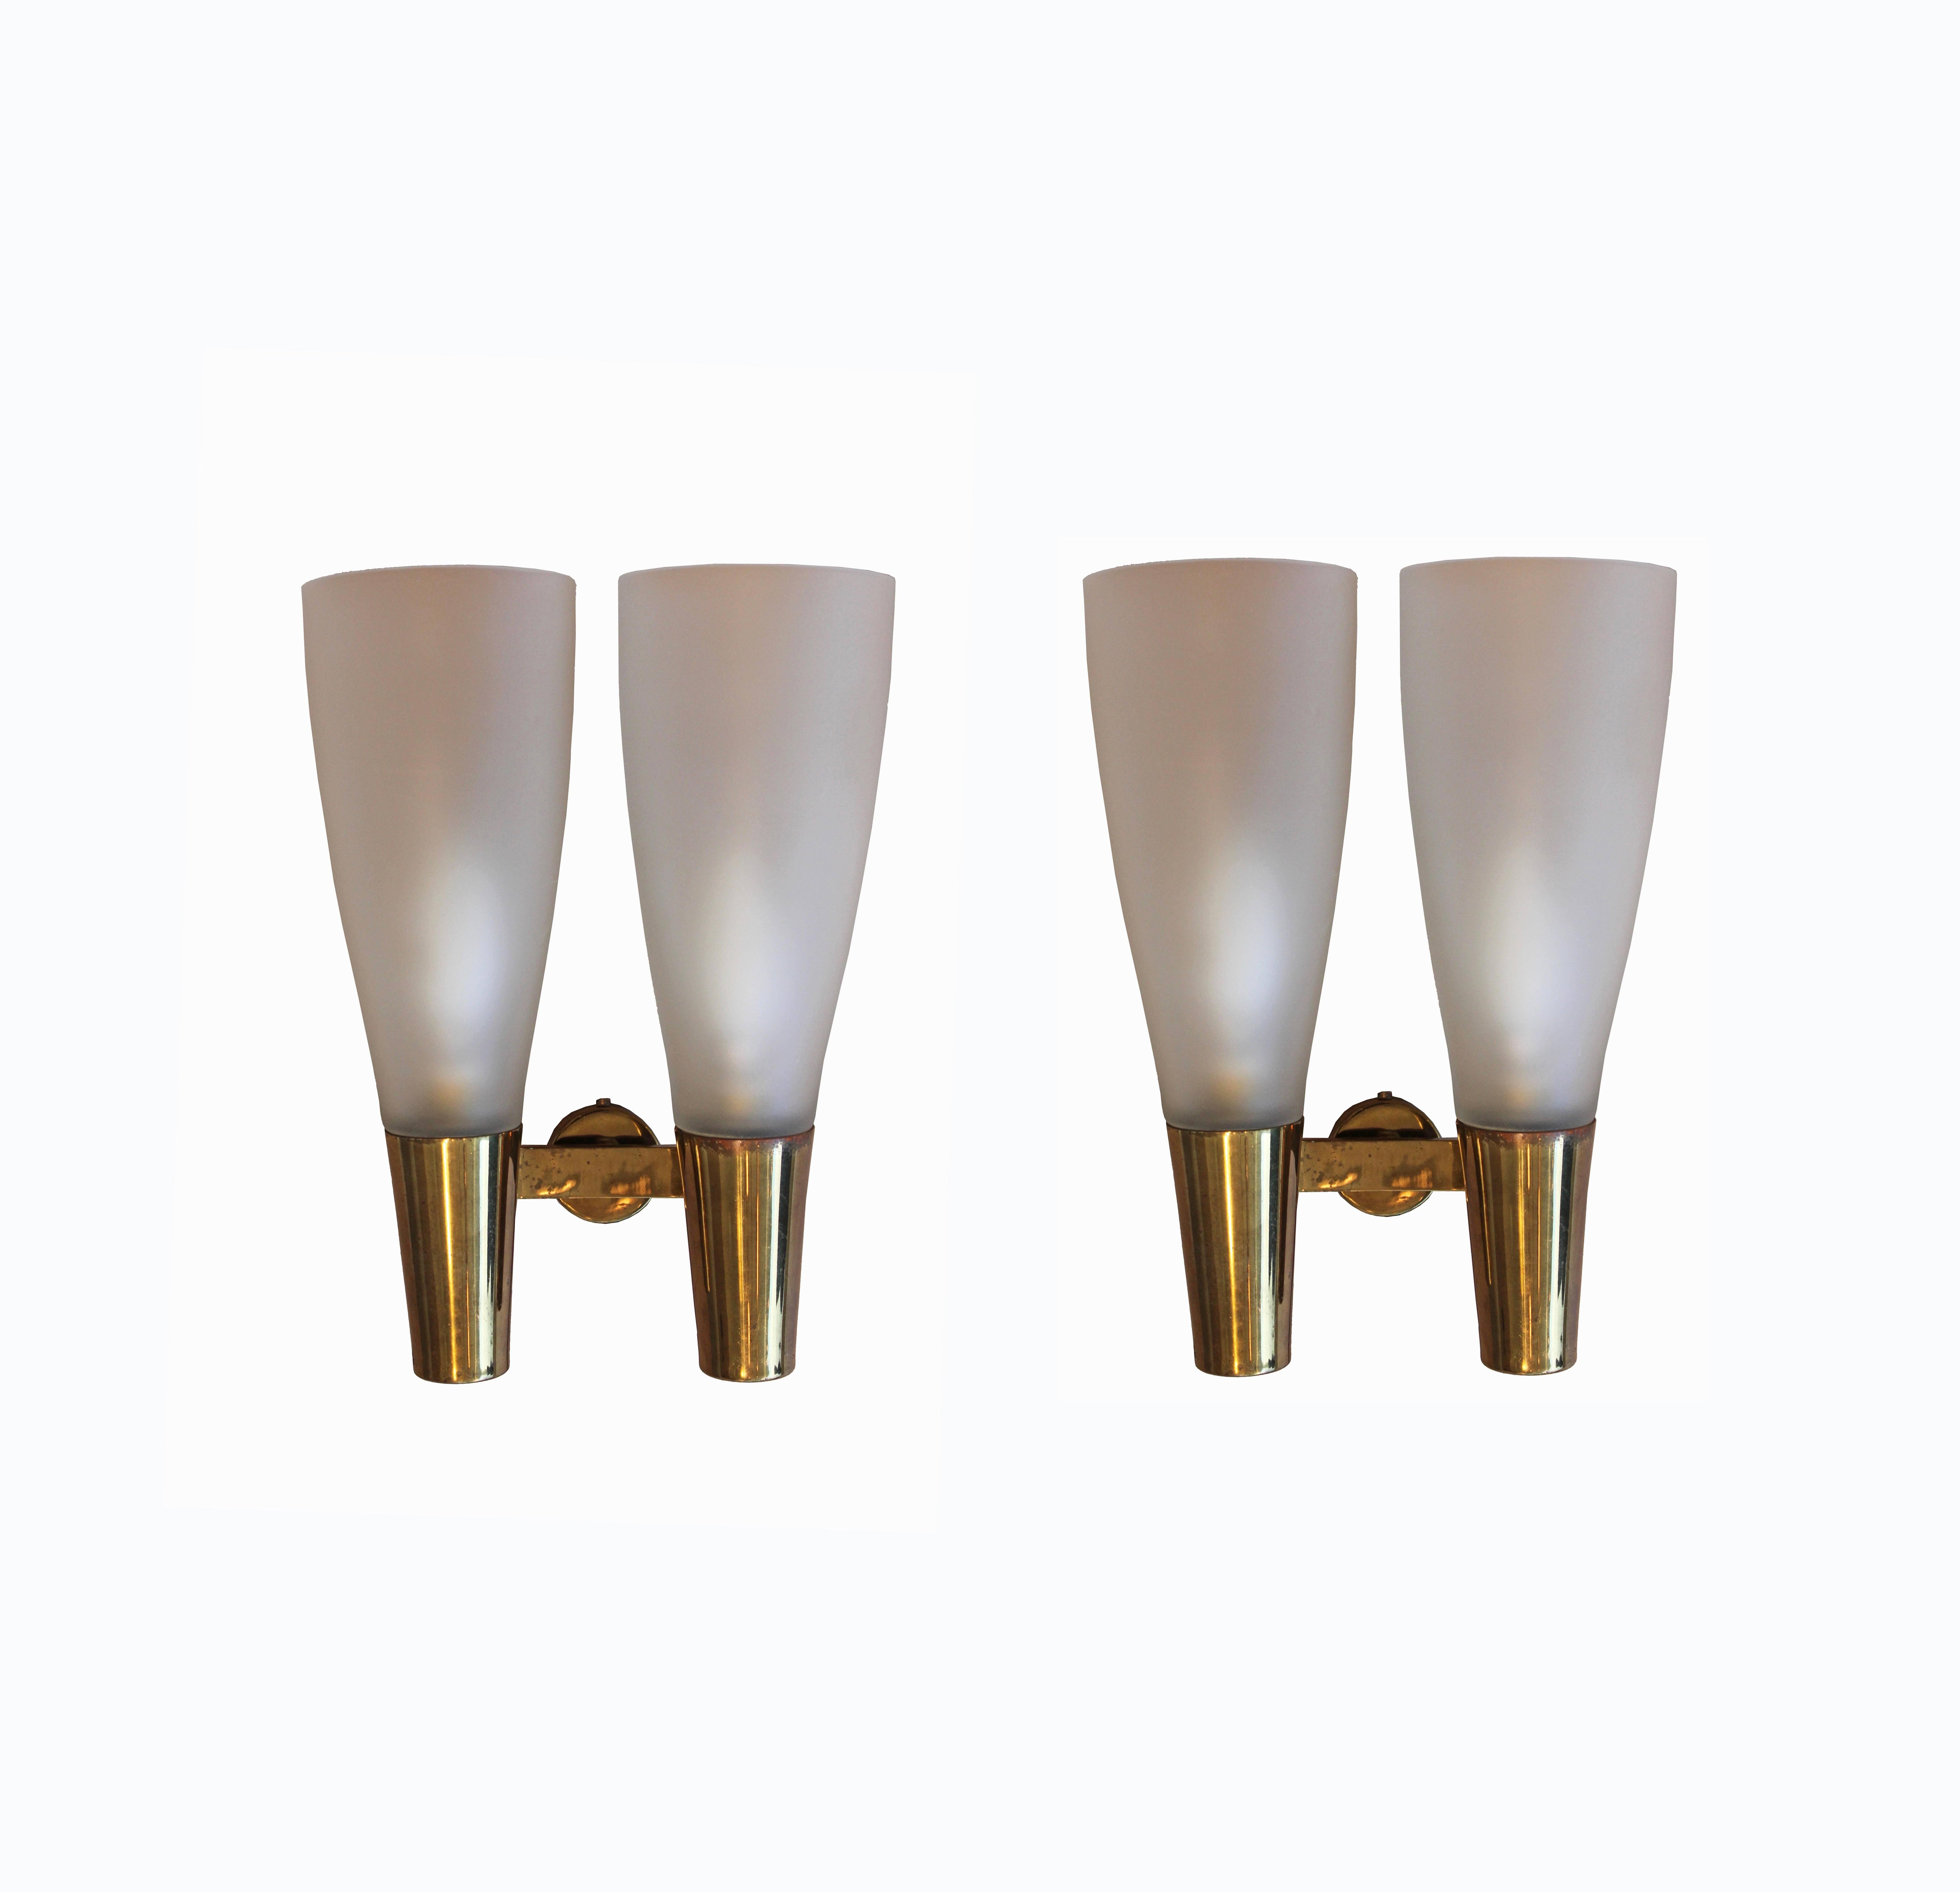 Four sconces in varnished brass with satin glass cones by Pietro Chiesa for Fontana Arte.
Originally designed in the 1930s, Fontana Arte re-issued several Pietro Chiesa designs in the 1960s. Model no. 1537/2, Italy, circa 1964.
Documented in